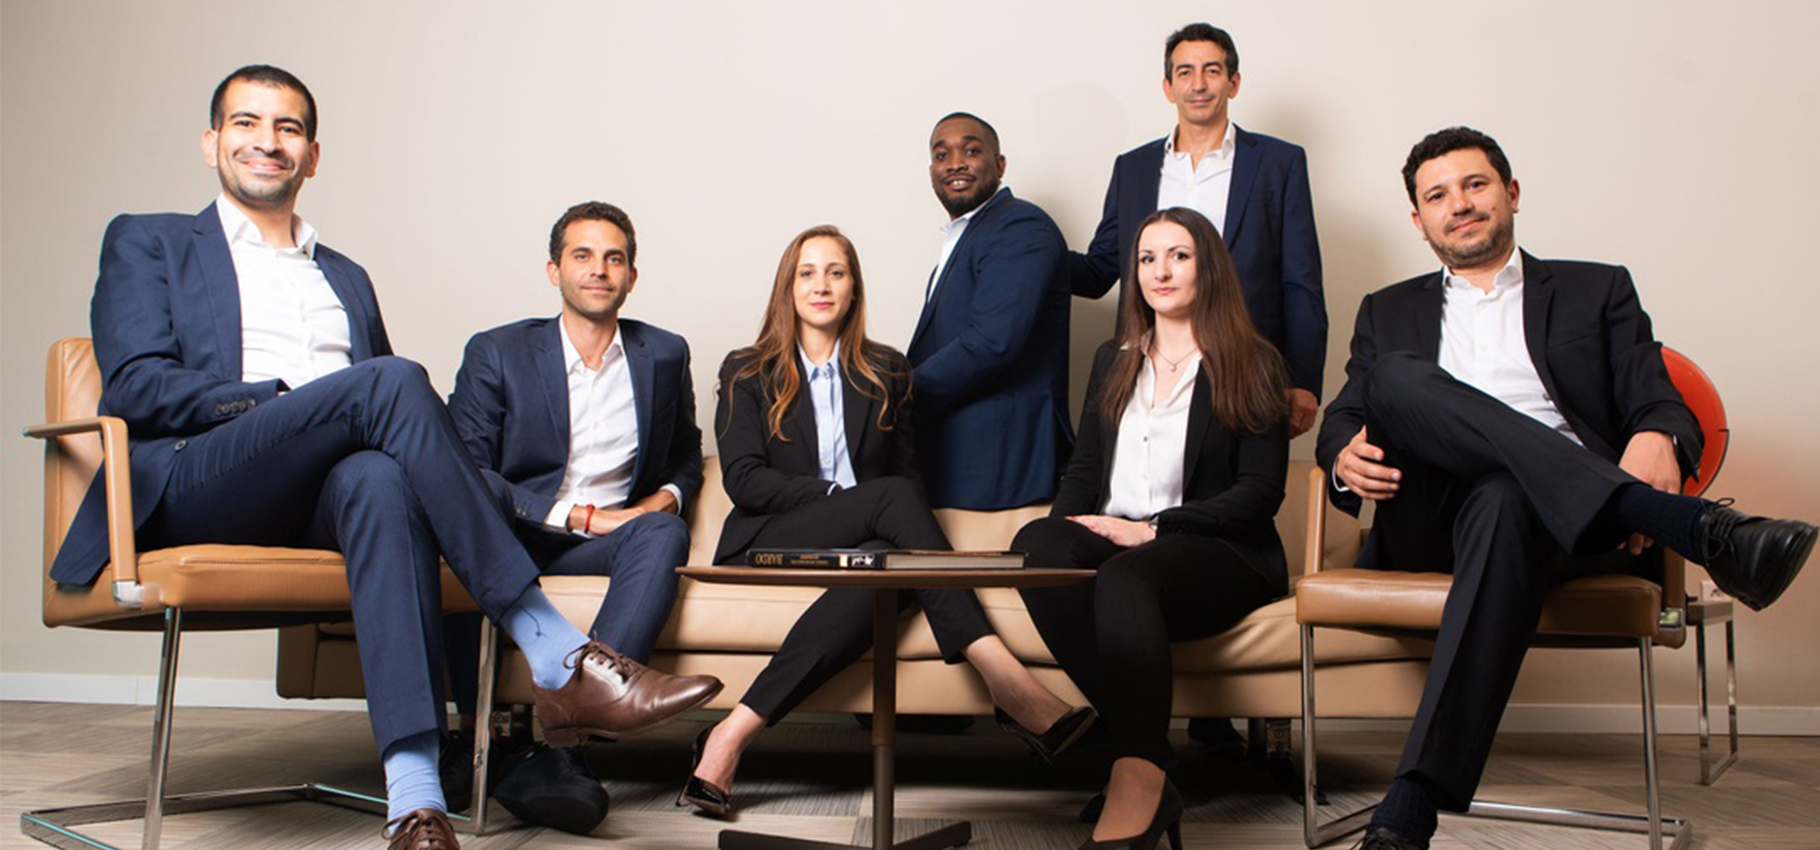 This €110 million VC fund for Africa is now prioritizing startups that can break even quickly